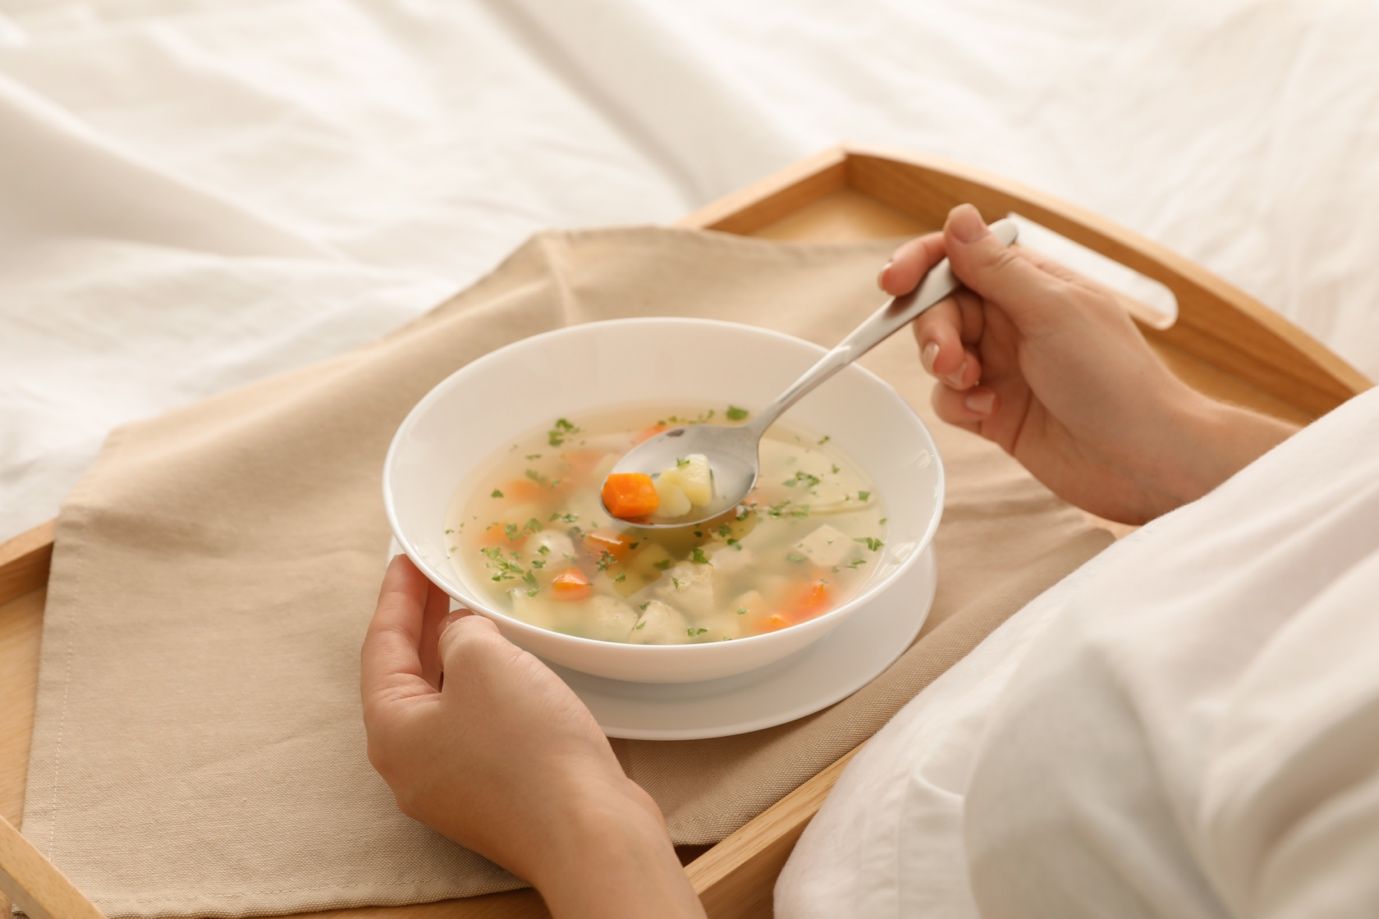 It's important to eat when you are sick, even when you don't feel much like eating. Broth and other liquids often are better choices than solid food.